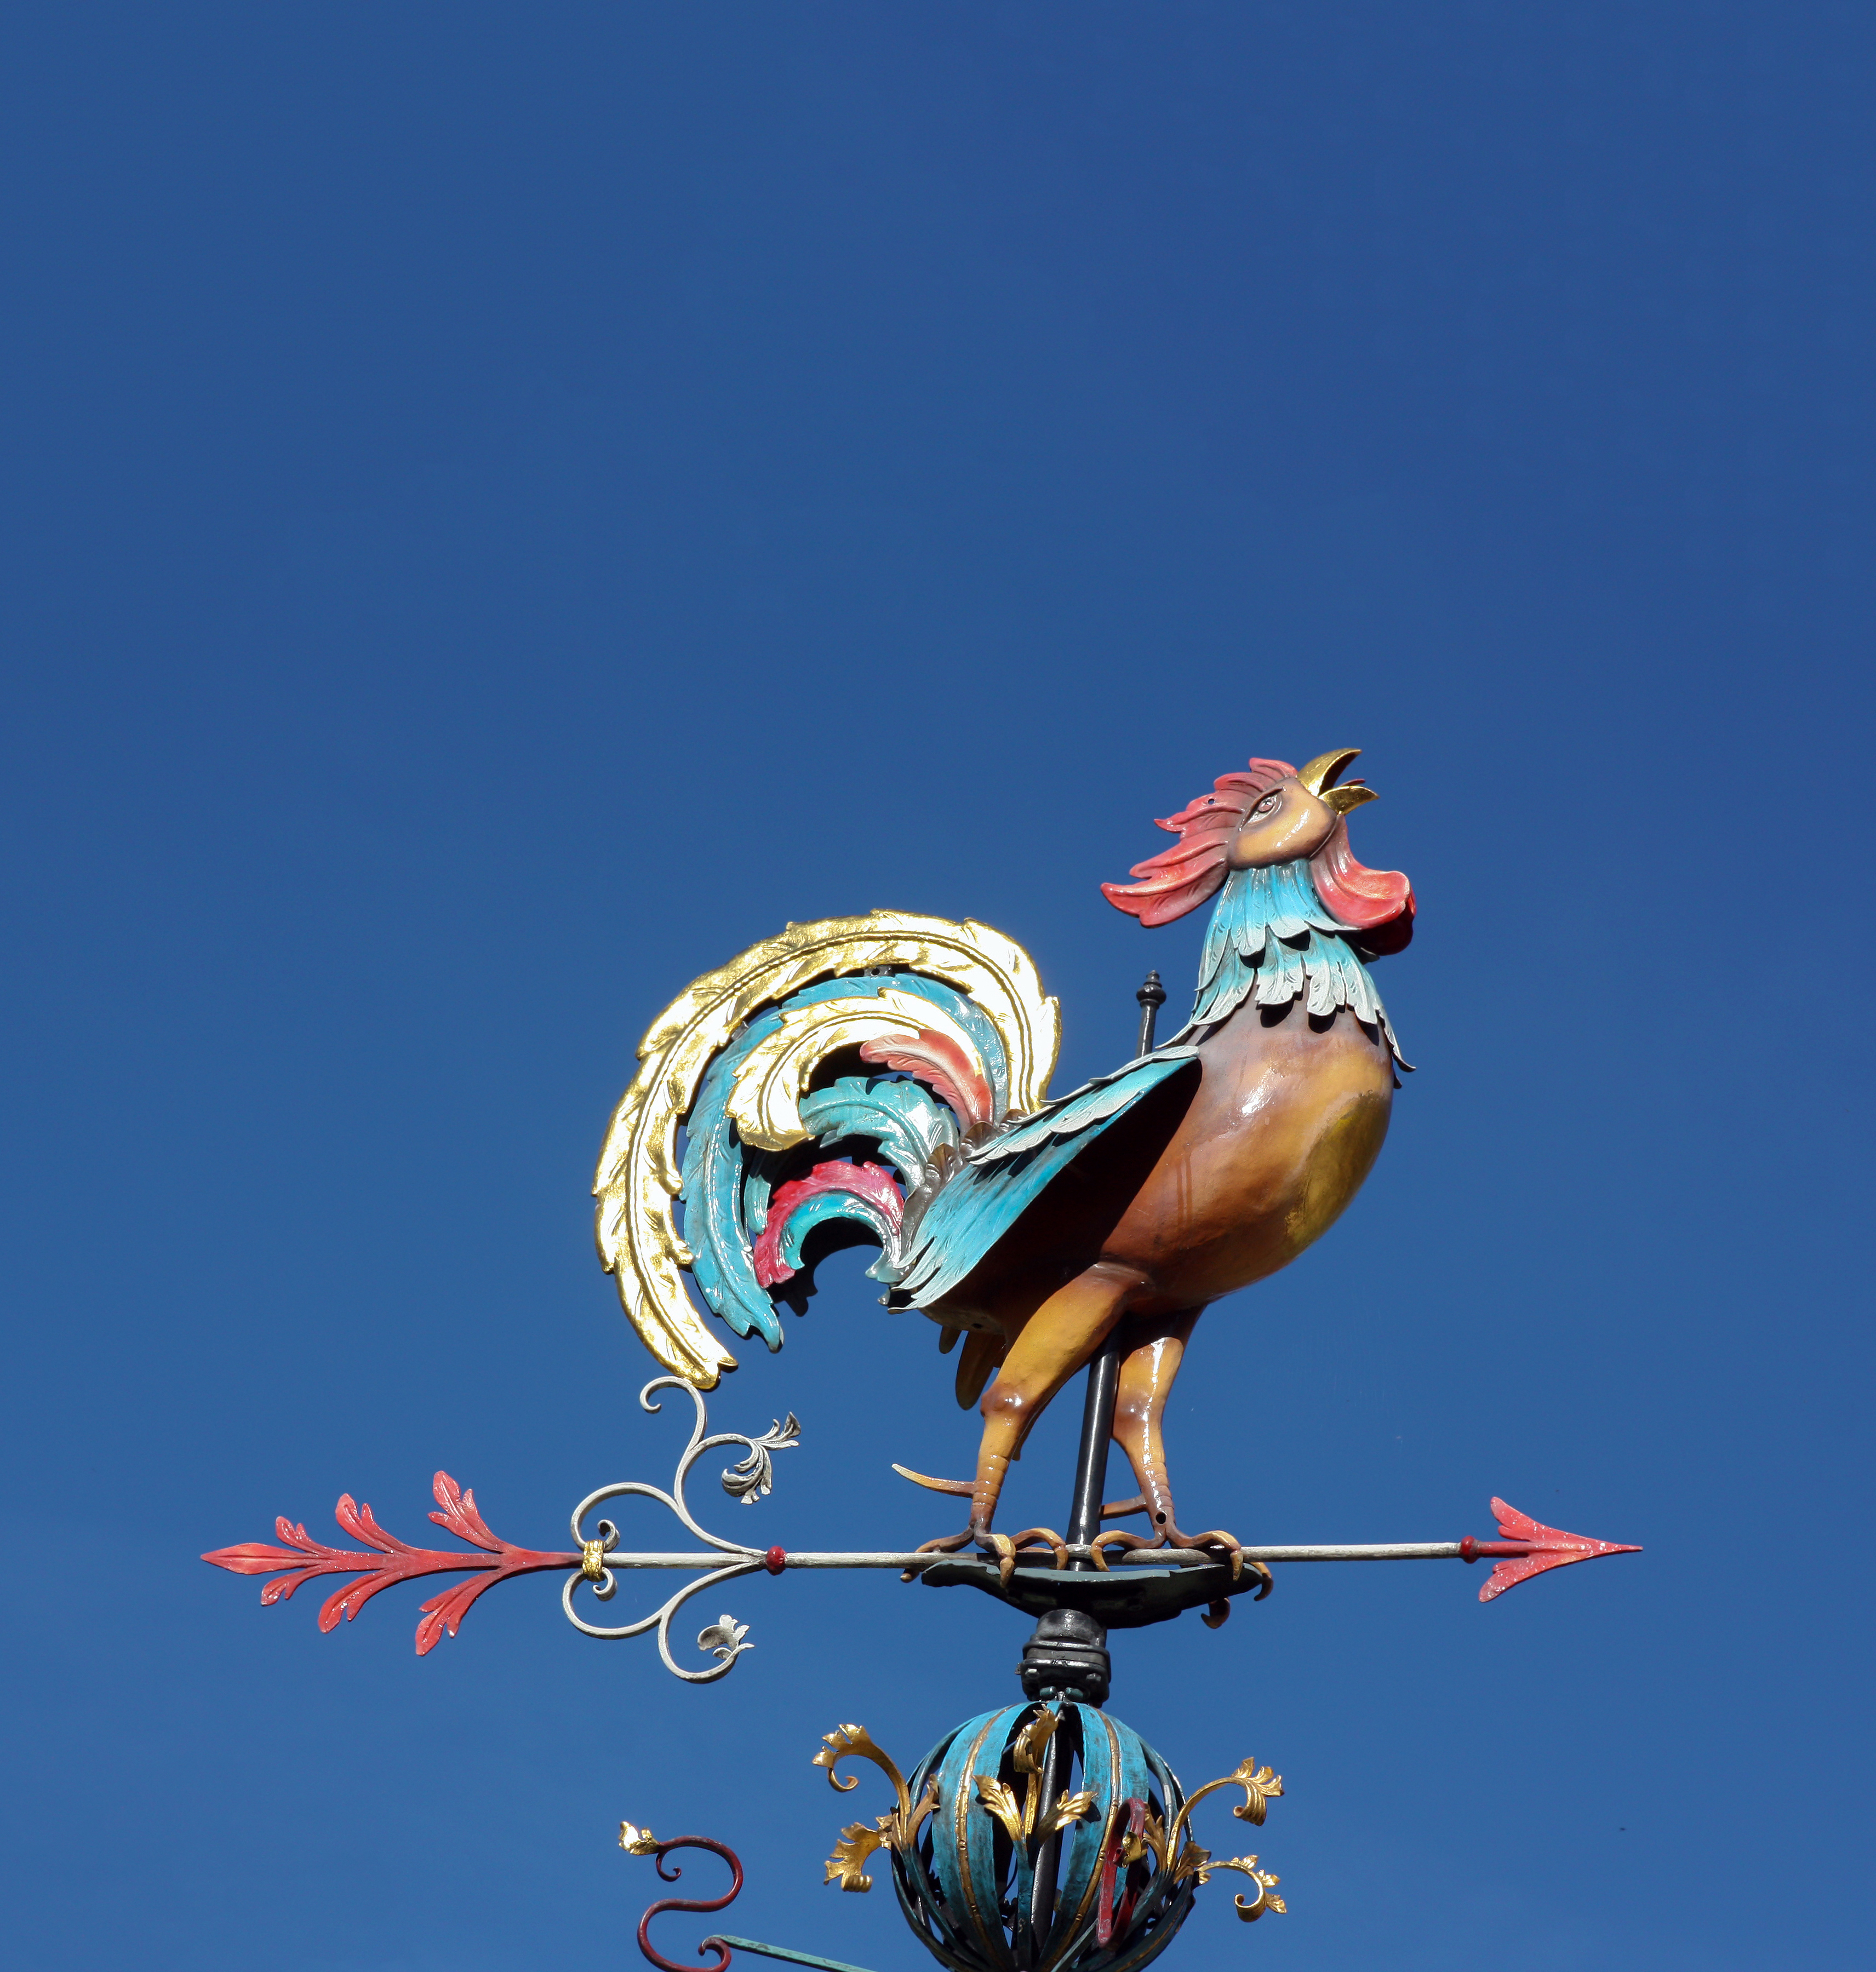 Folklore of Cocks or Roosters on Weathervanes | Cocks, Cockcrows, and Weathercocks ...